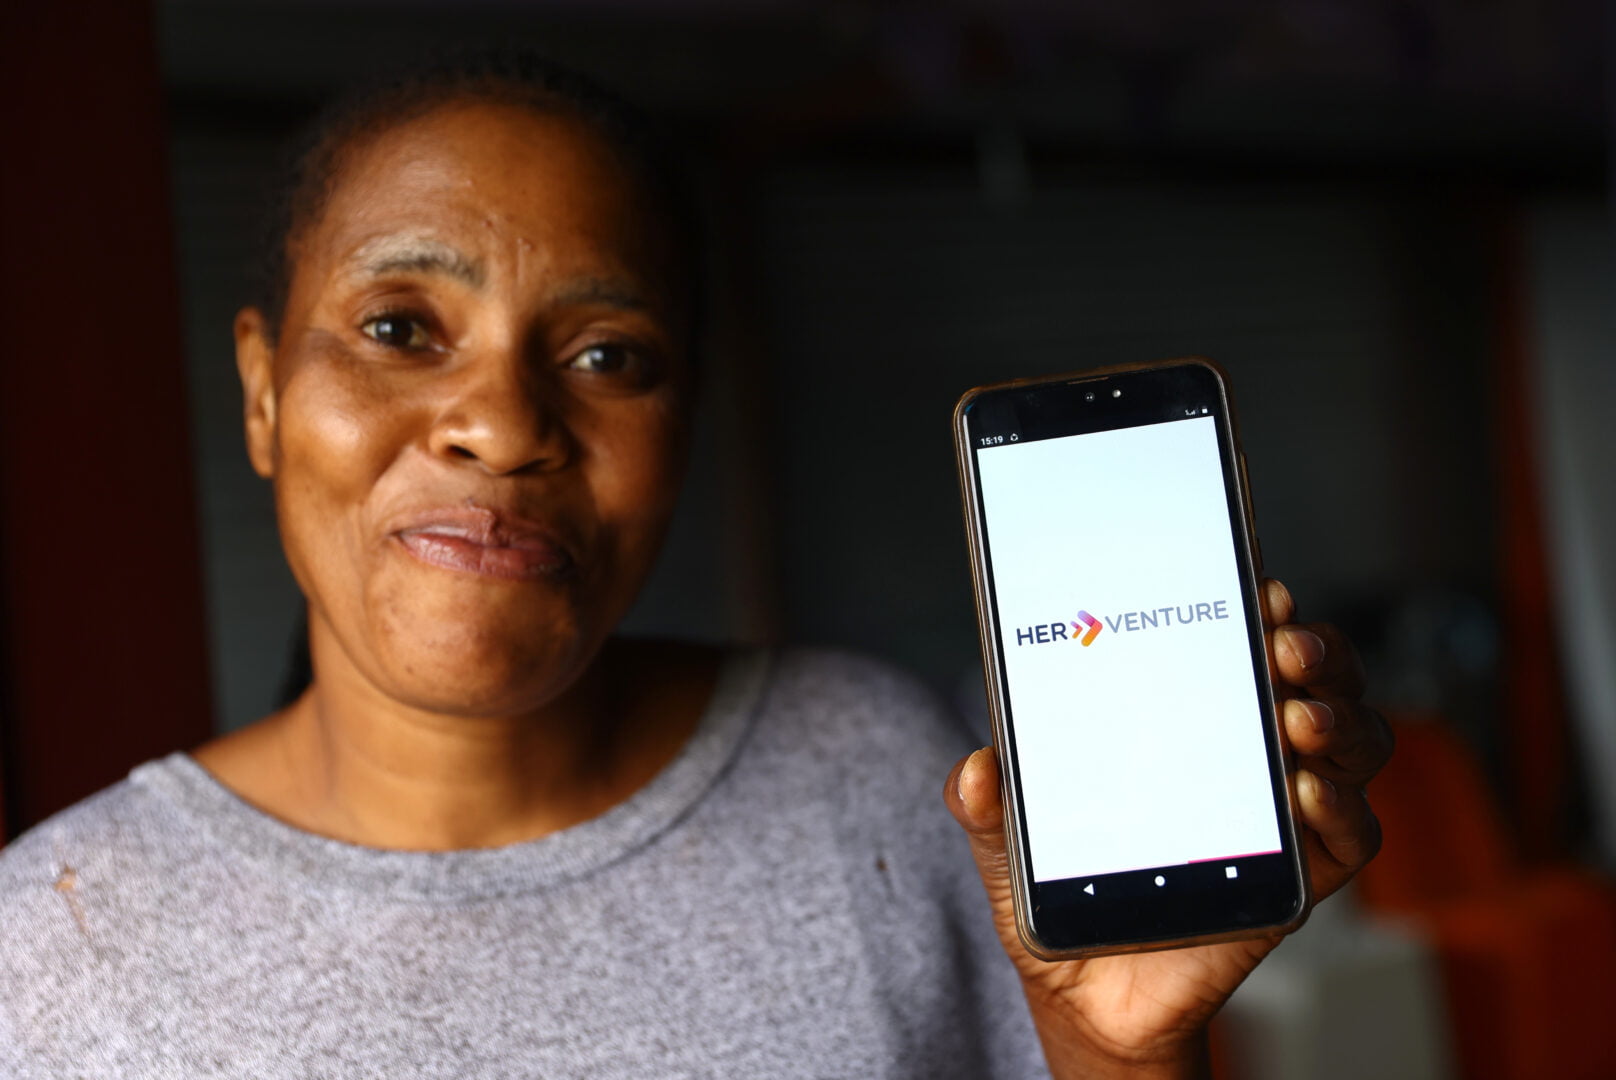 Mercy Manzini, founder of Mercy’s Company, and HerVenture User poses with the app